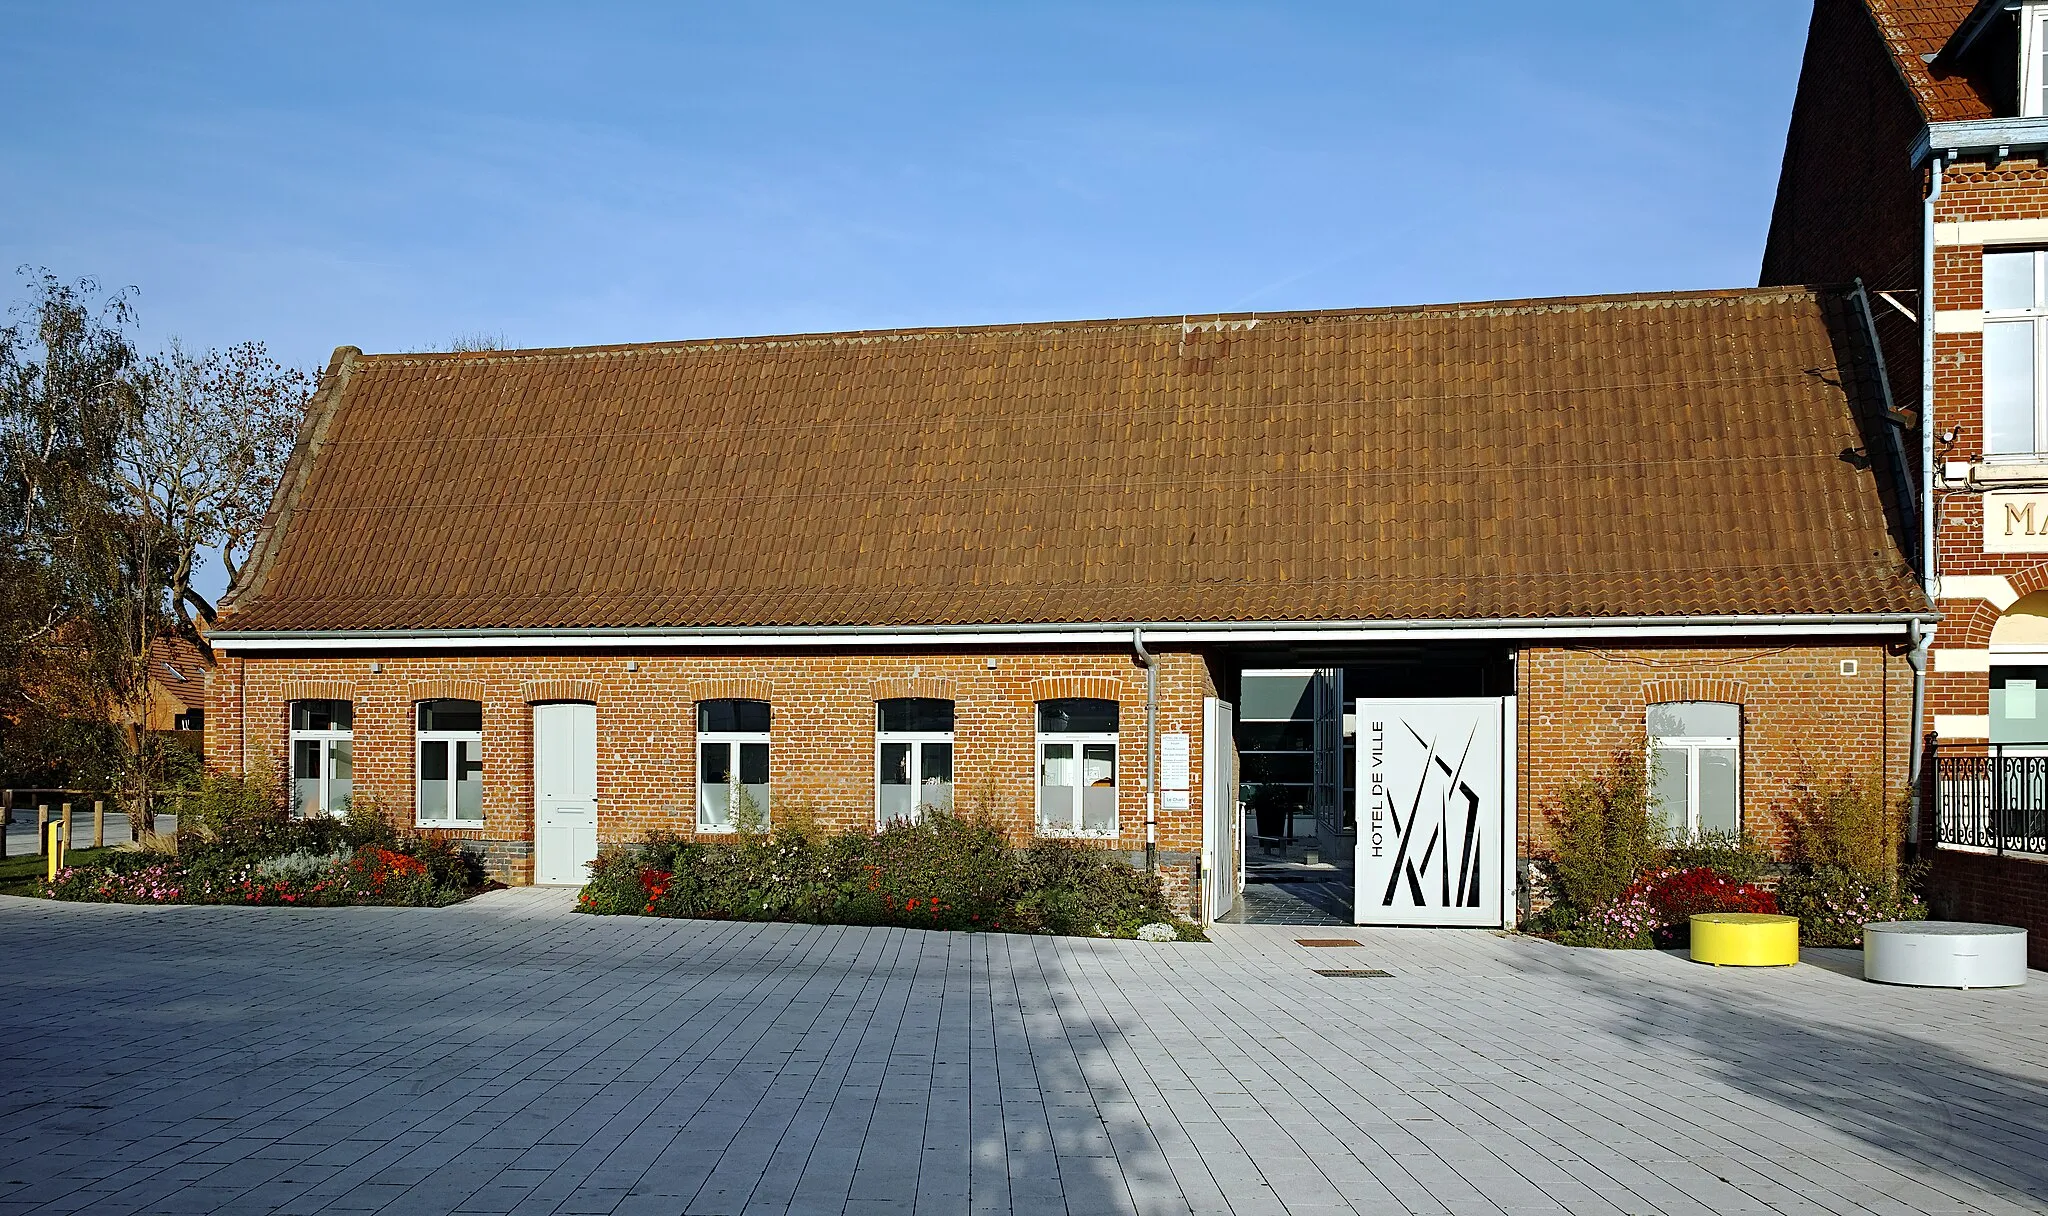 Photo showing: The former Fauquenois farm, now annexed to the town hall of Sainghin-en-Weppes.